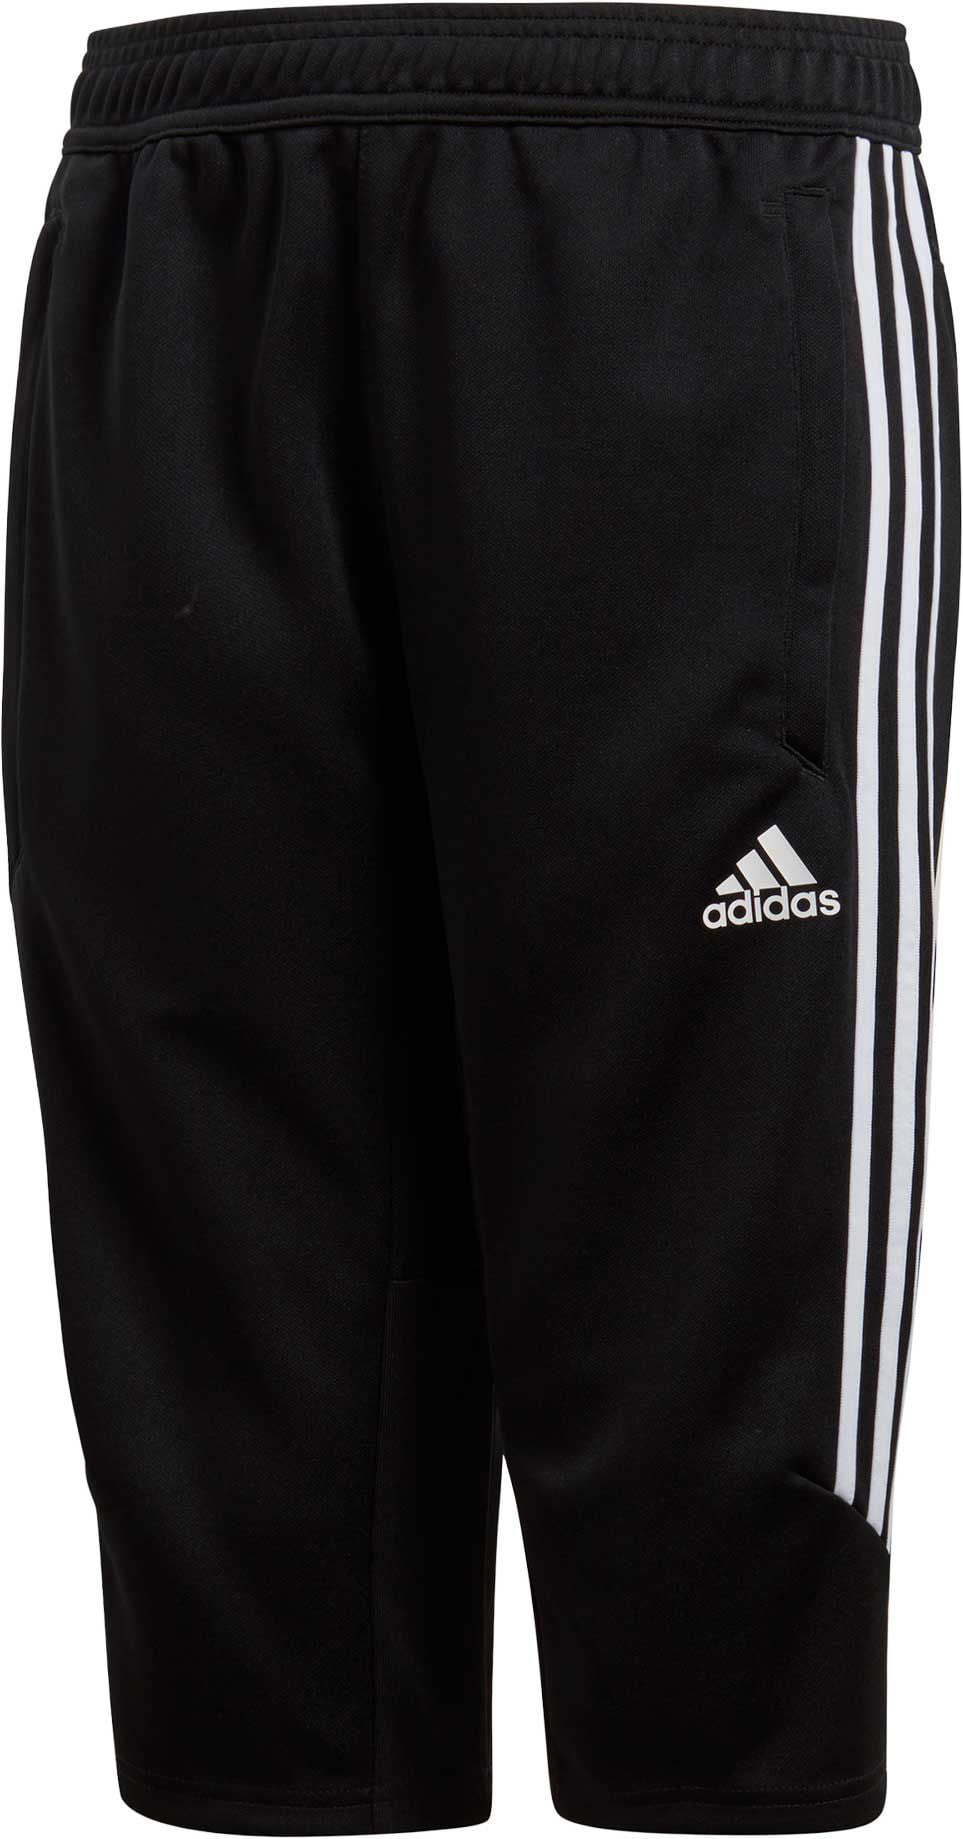 white adidas yandhi tiro 17 pants youth blue green dress  Arvind Sport   adidas yandhi Sportswear Shoes  Clothes in Unique Offers